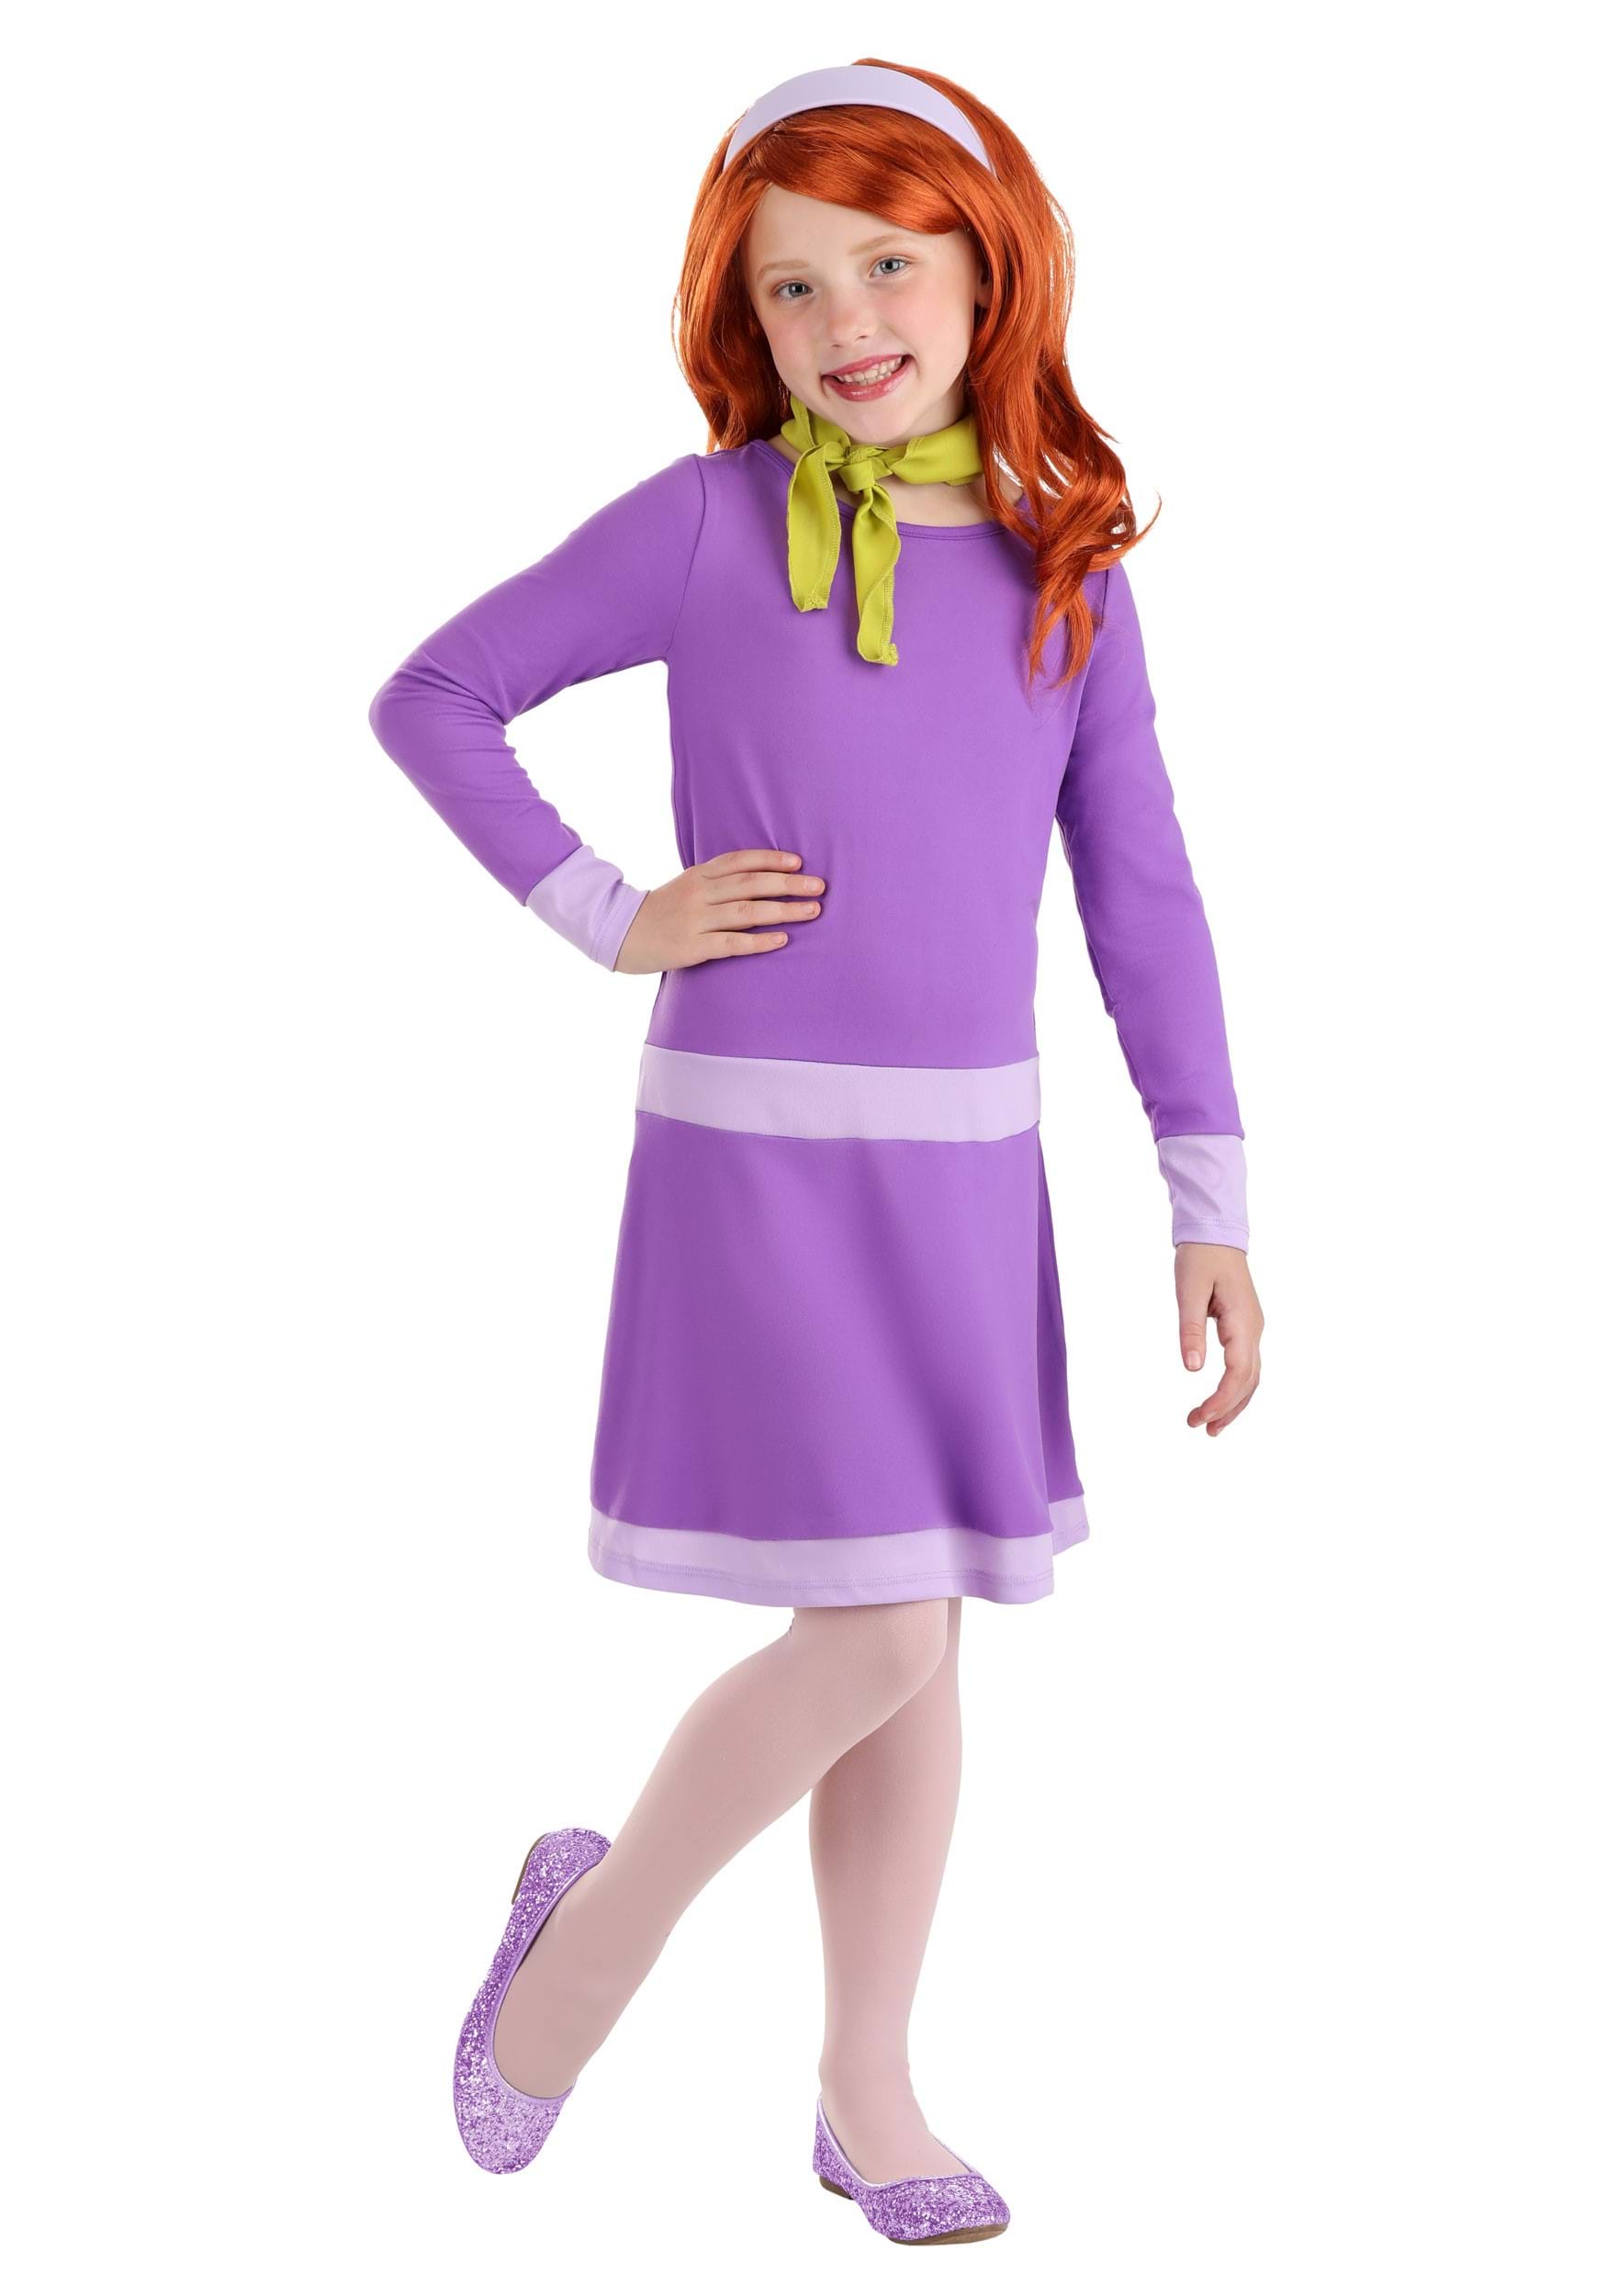 scooby doo where are you daphne